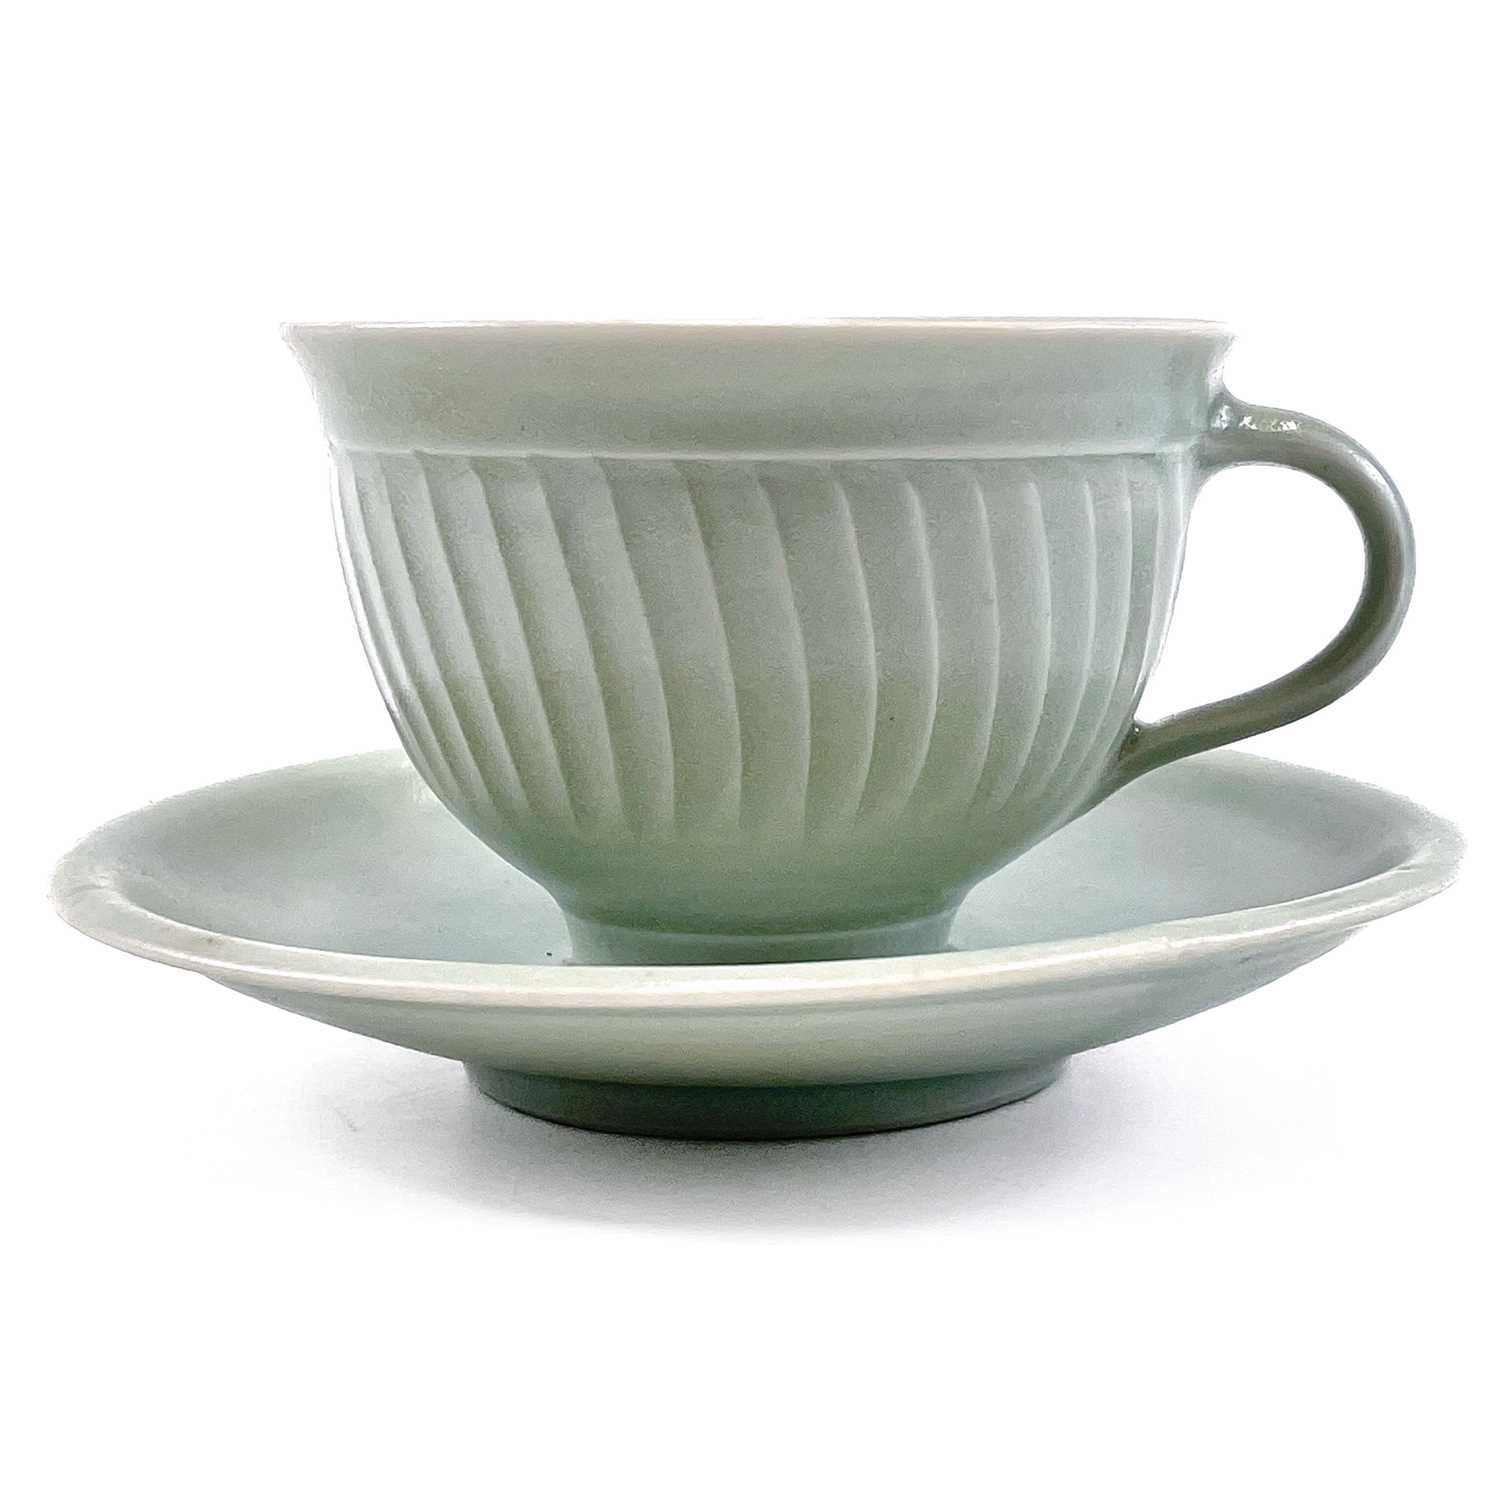 David LEACH (1911-2005 Cup and Saucer with Celadon glaze